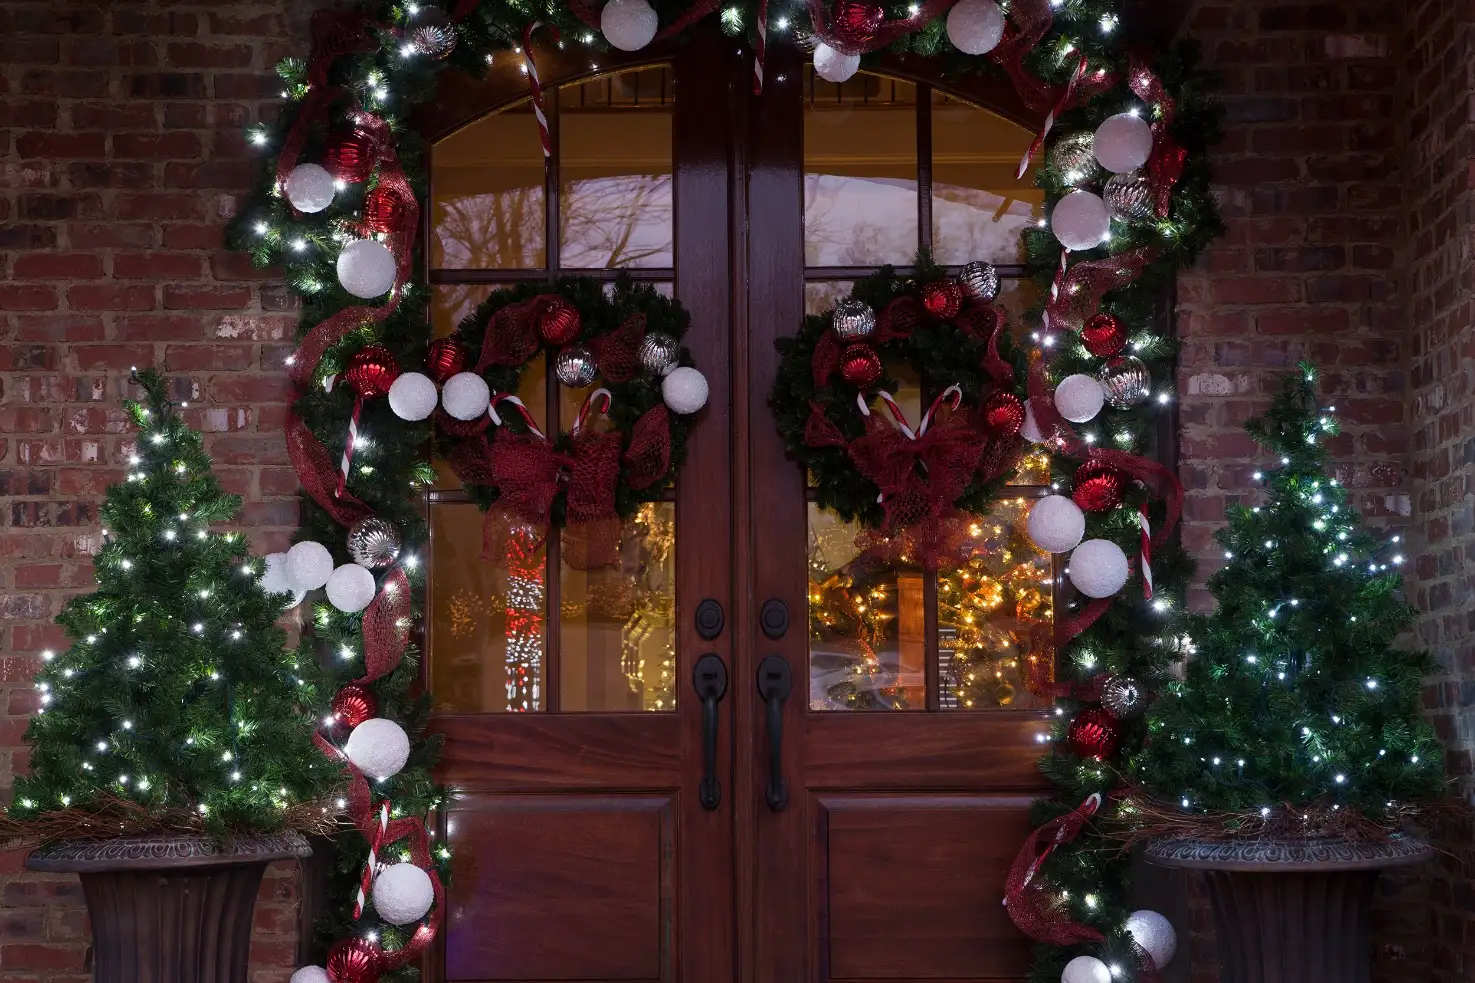 Light ways to decorate your front door for Christmas